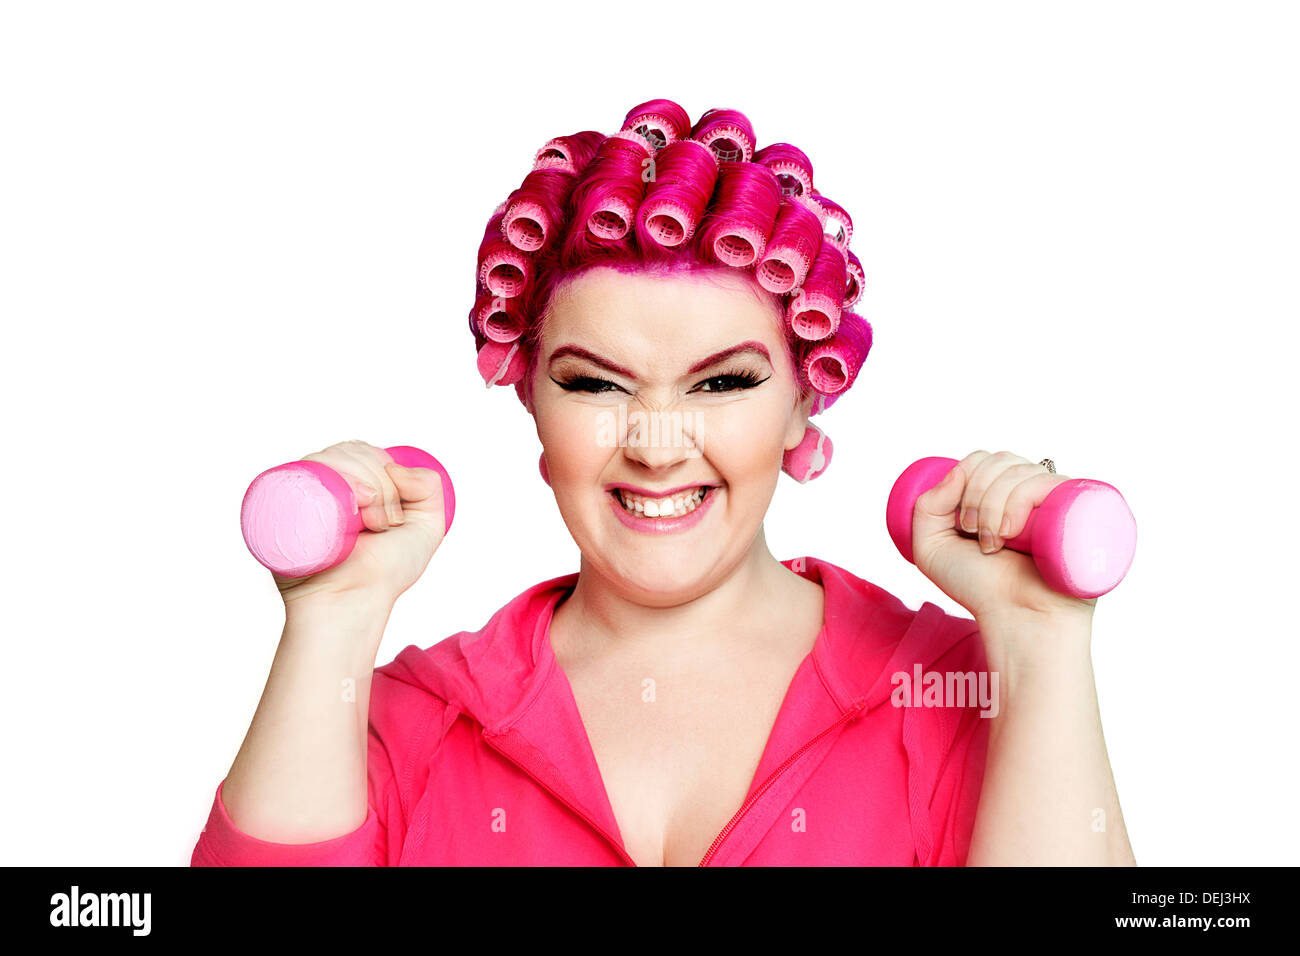 Portrait a young woman happily lifting weights Stock Photo